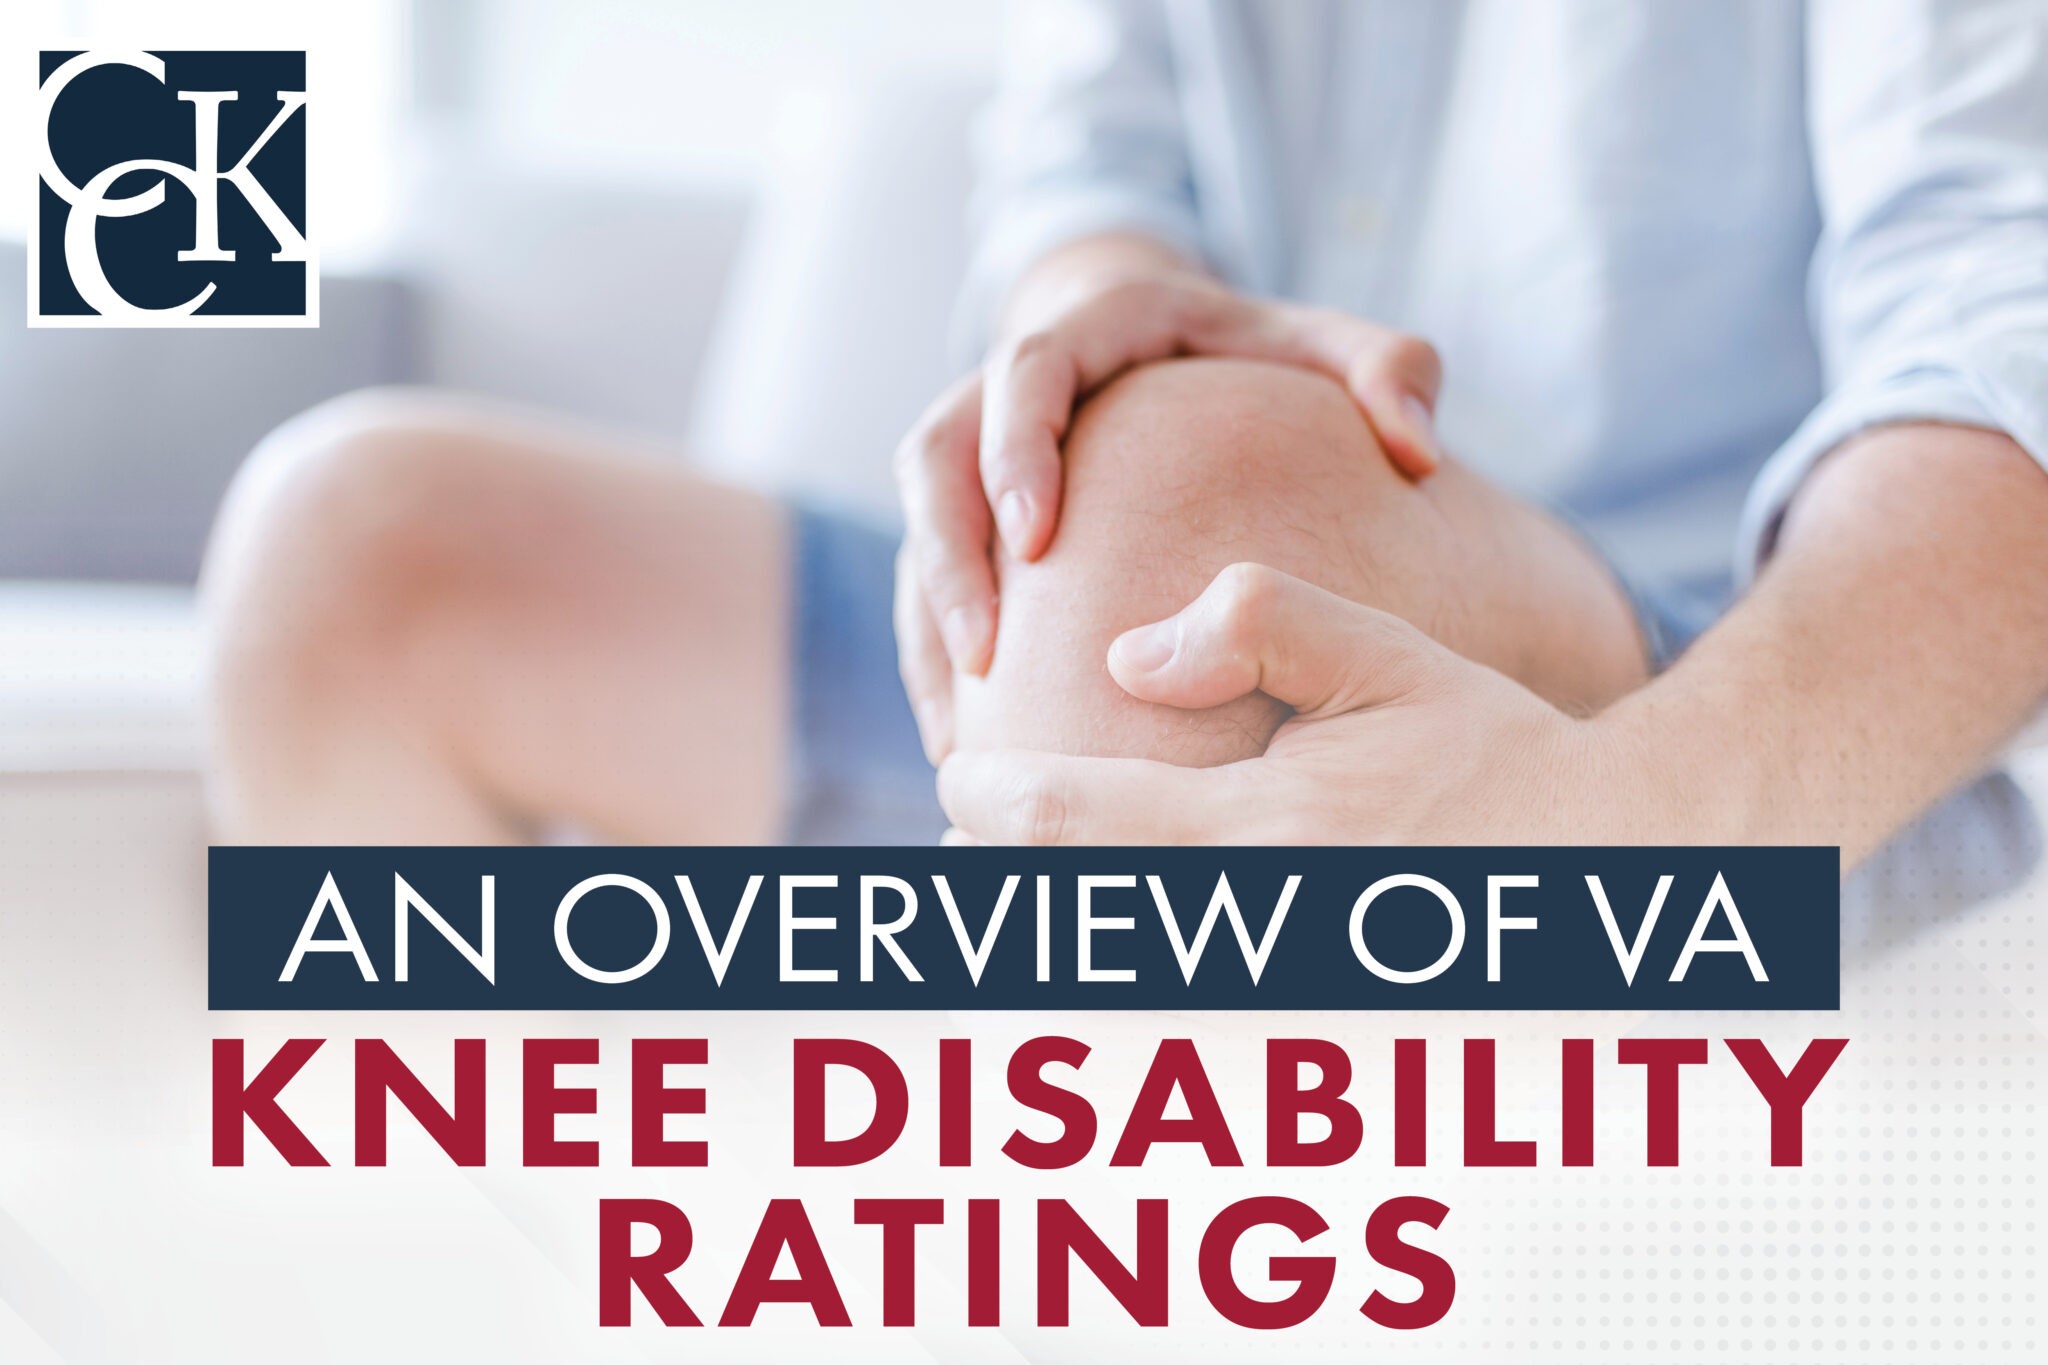 An Overview of VA Knee Disability Ratings CCK Law